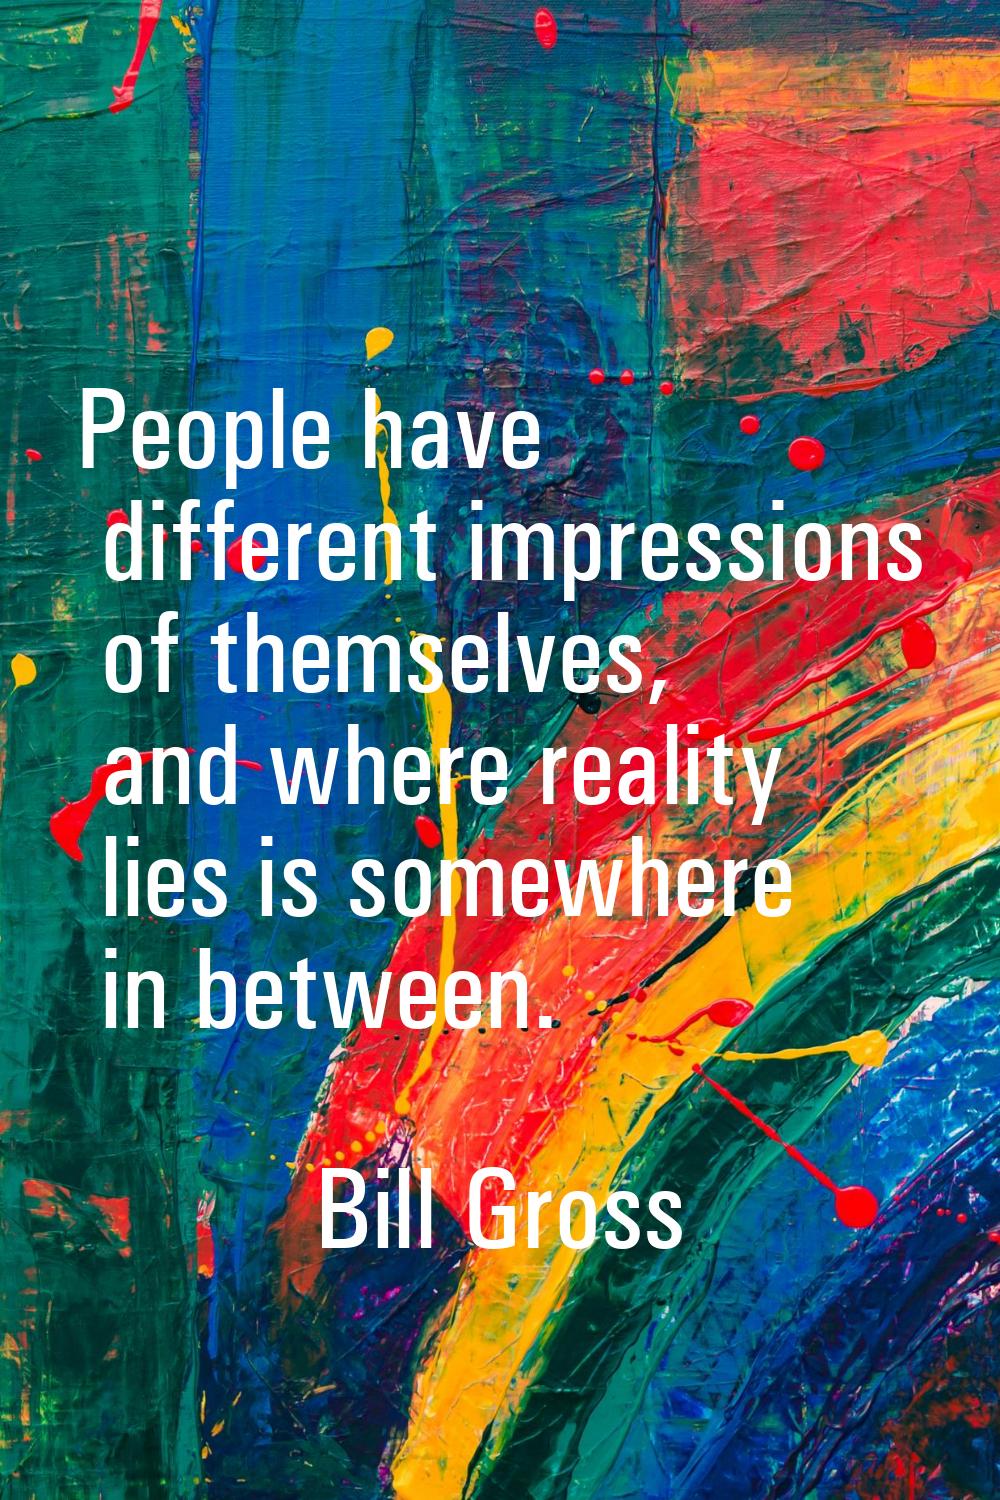 People have different impressions of themselves, and where reality lies is somewhere in between.